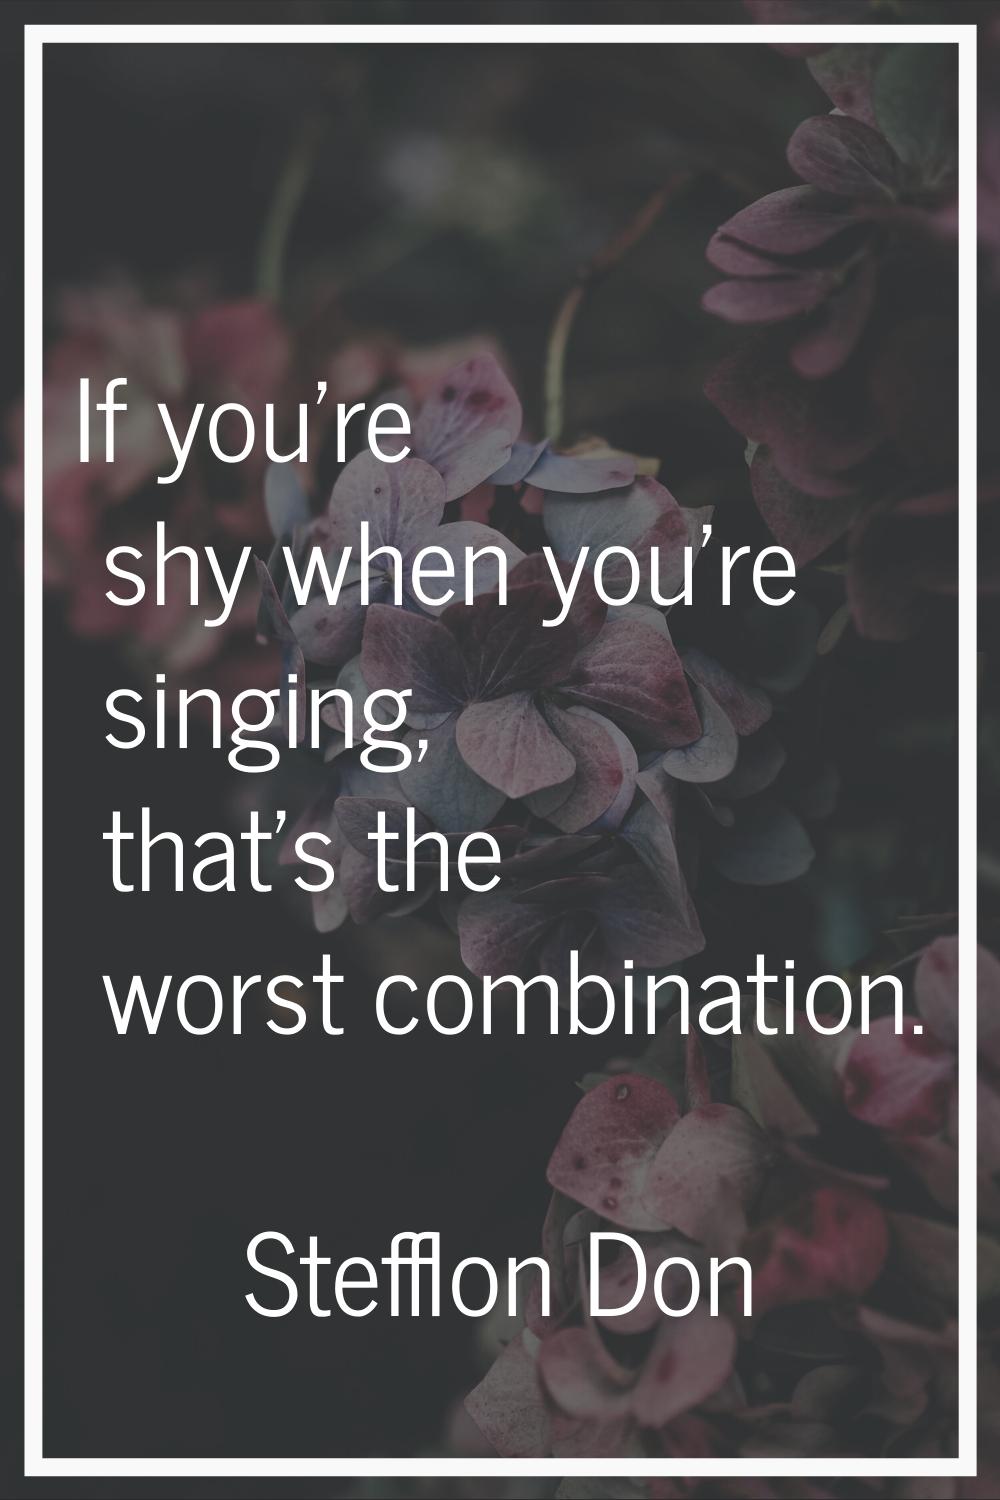 If you're shy when you're singing, that's the worst combination.